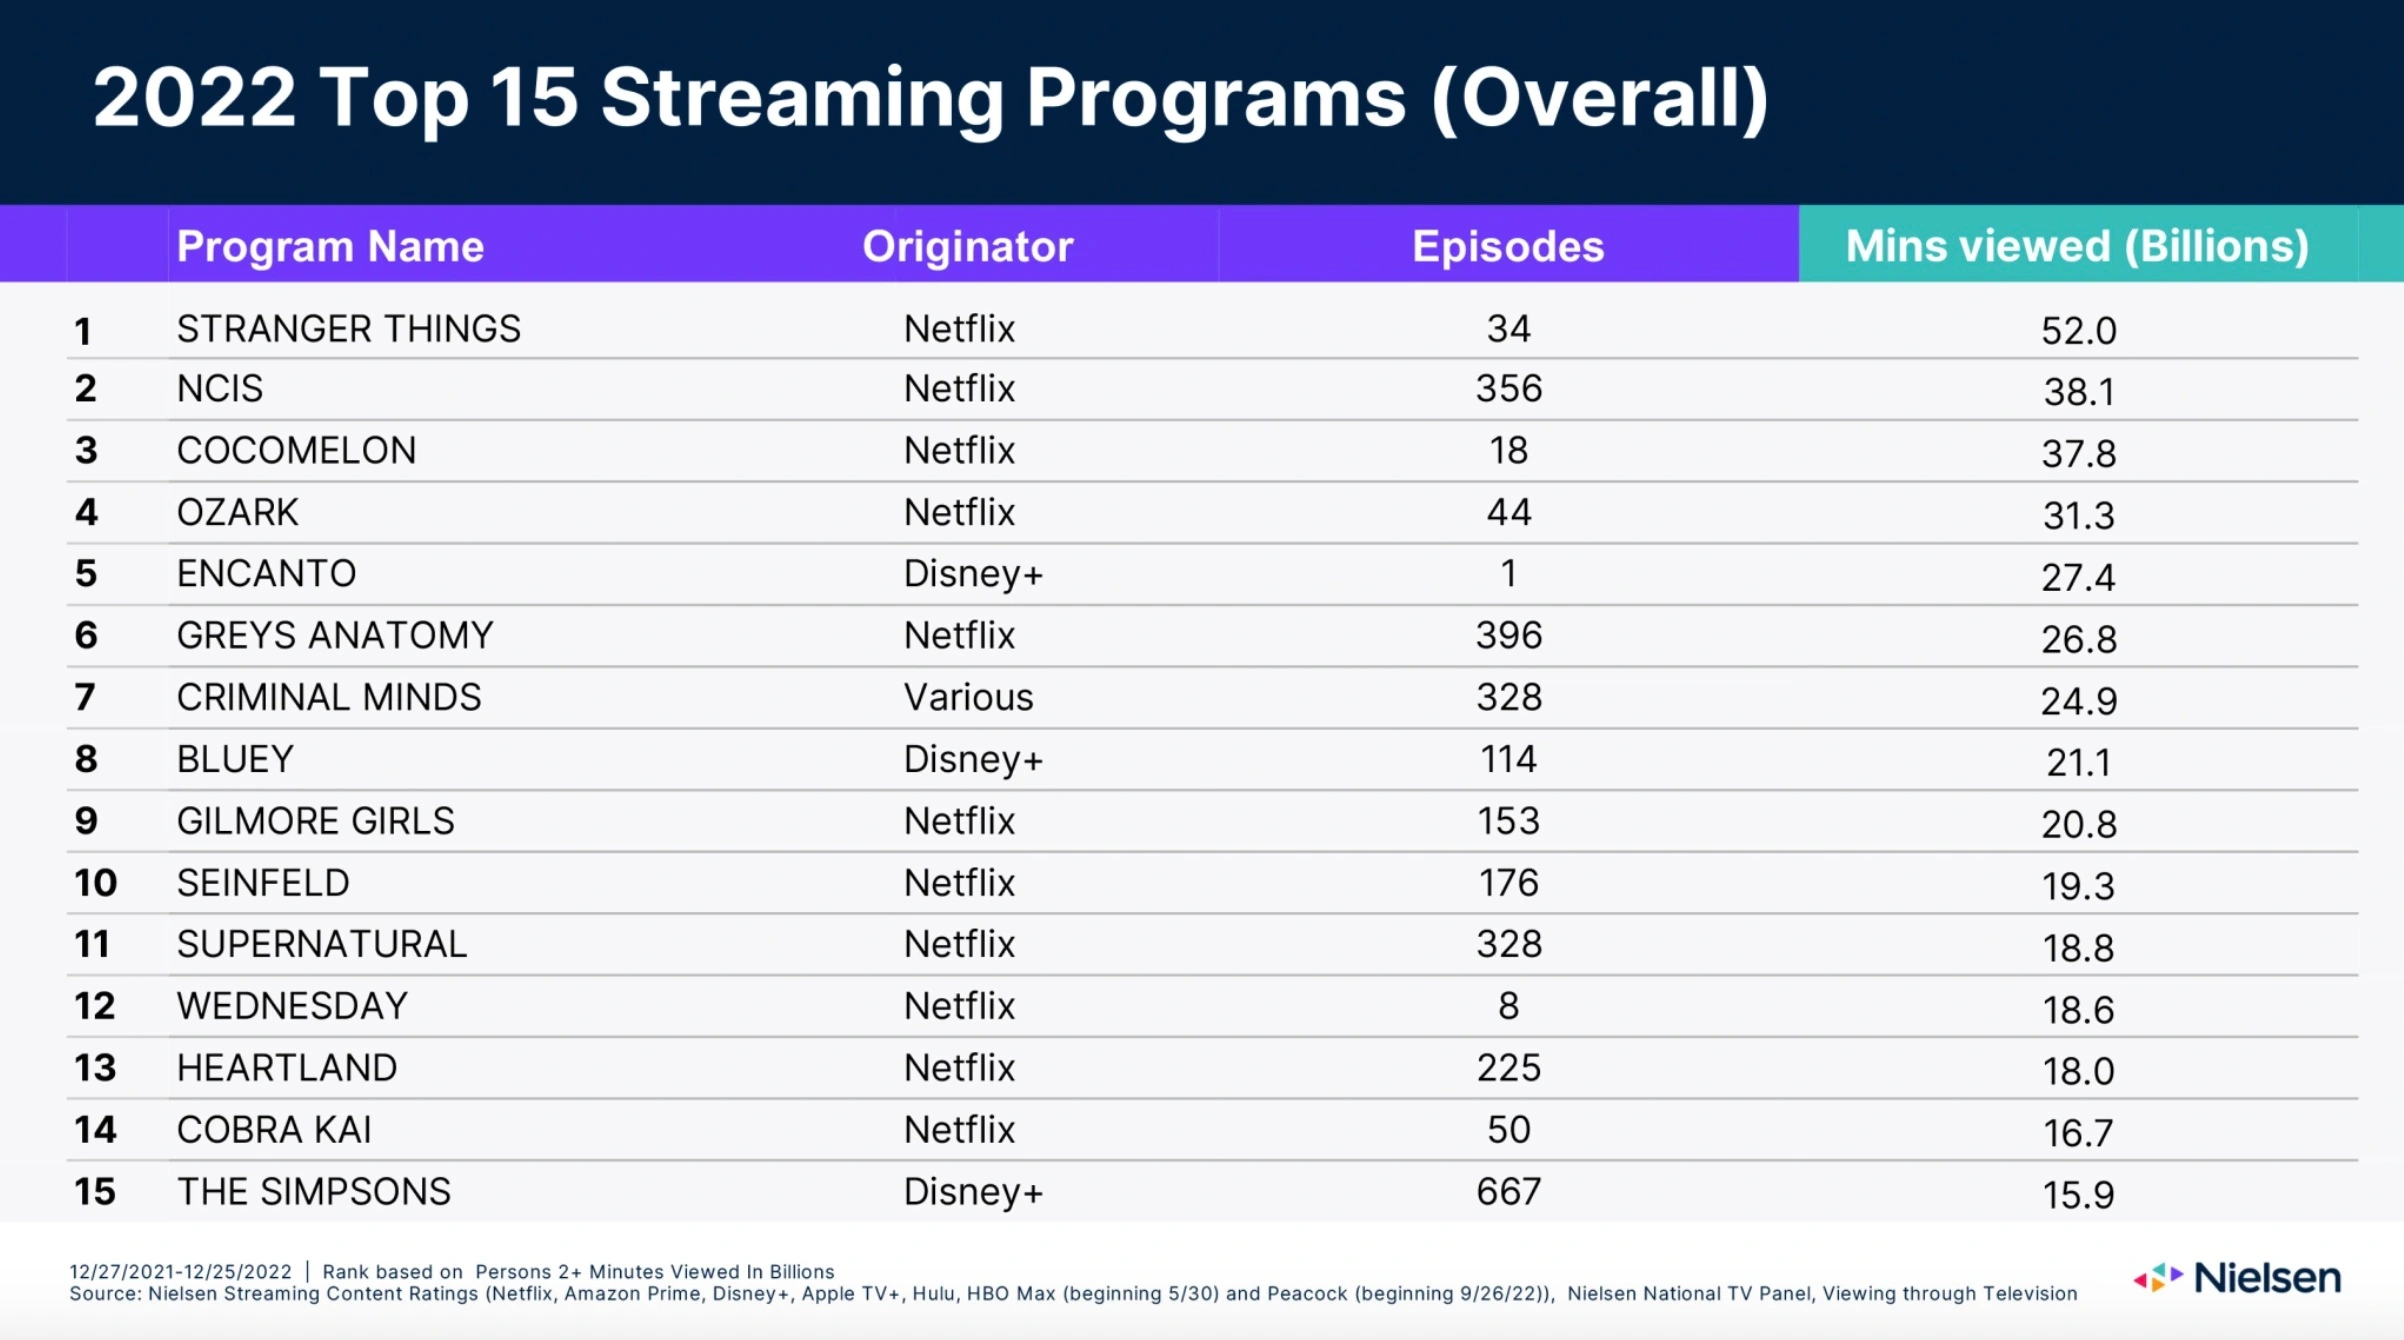 2022 Top 15 Streaming Programs Overall